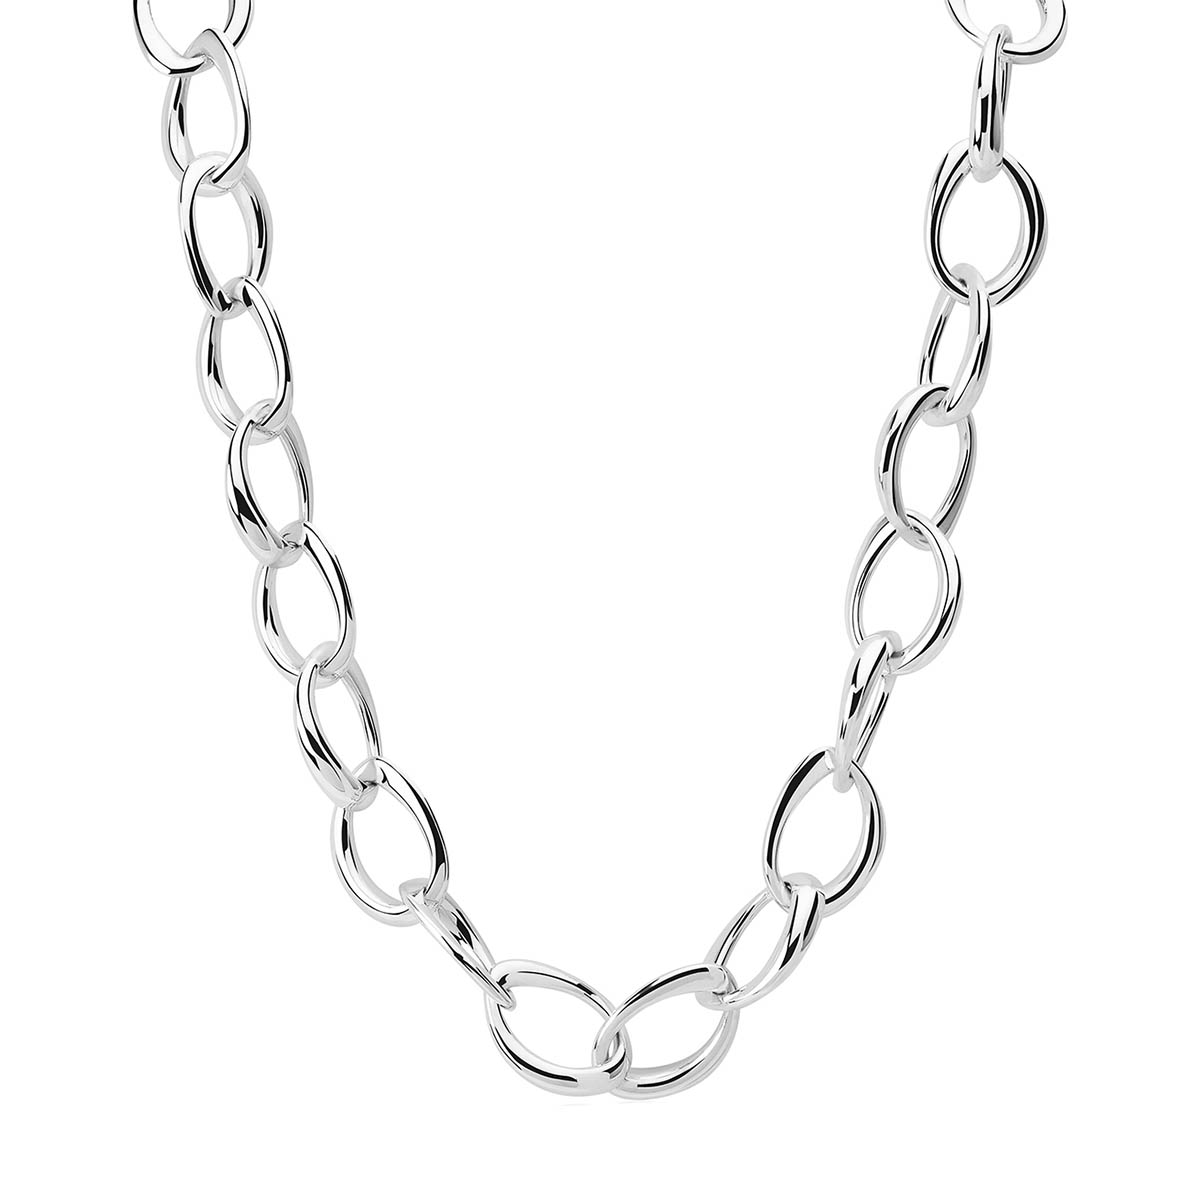 Maslo Oval Link Chain Necklace | Anthropologie Japan - Women's Clothing,  Accessories & Home